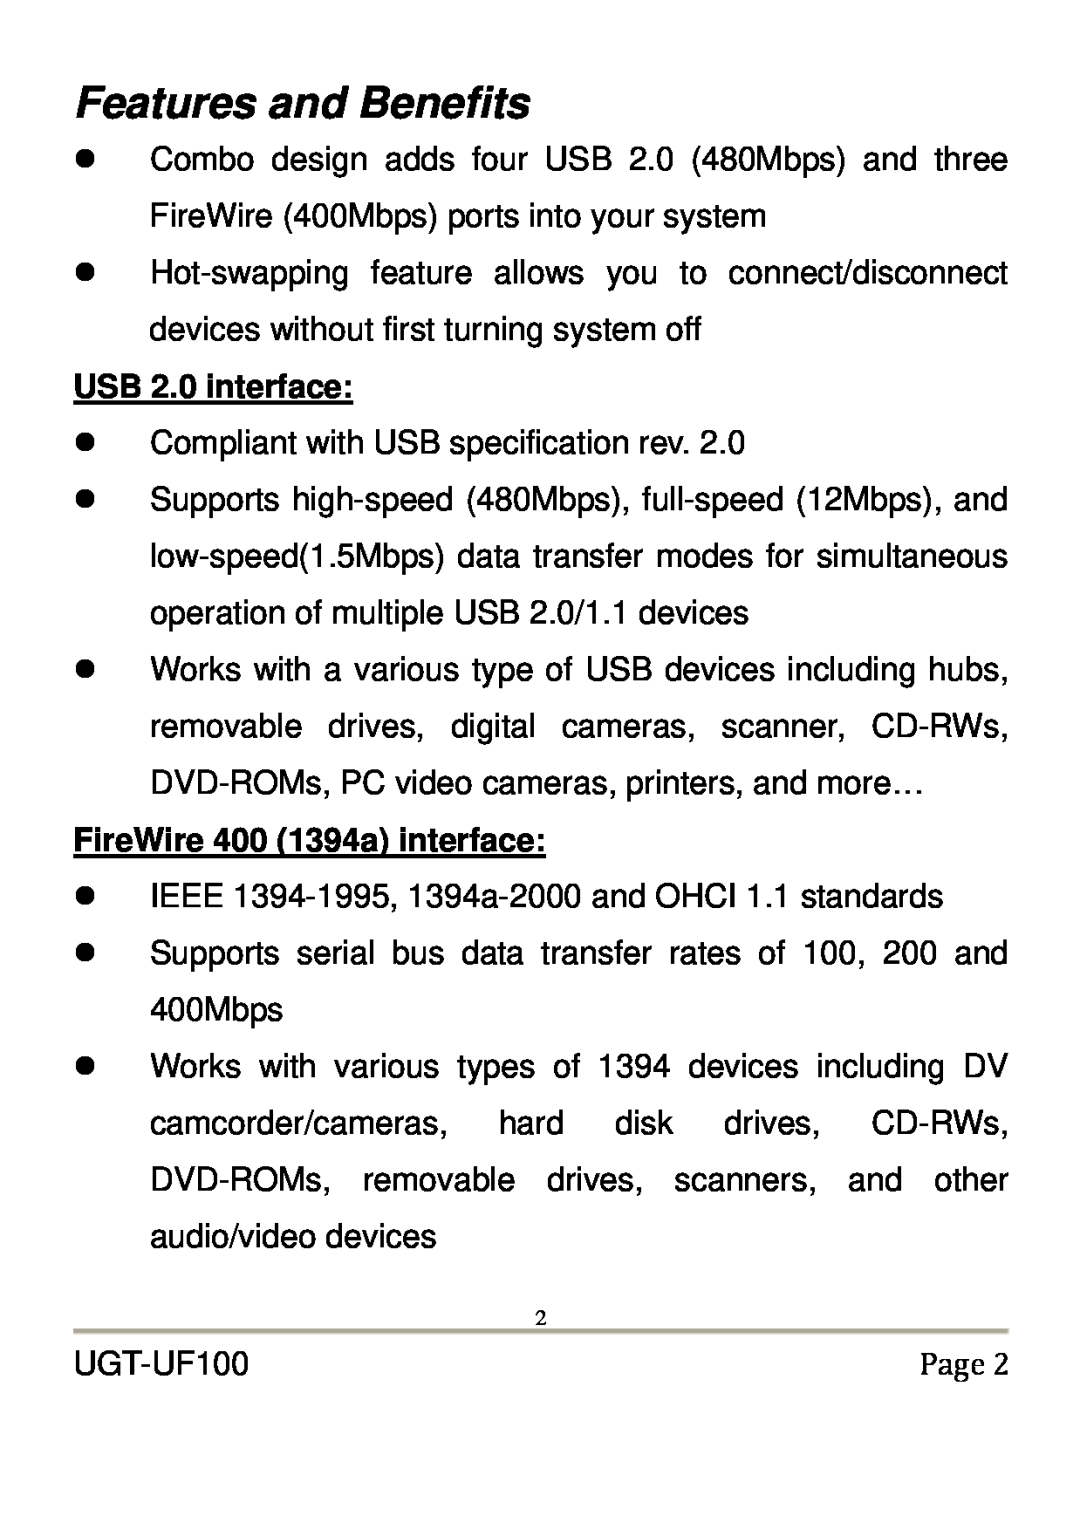 Vantec UGT-UF100 user manual Features and Benefits, USB 2.0 interface, FireWire 400 1394a interface 